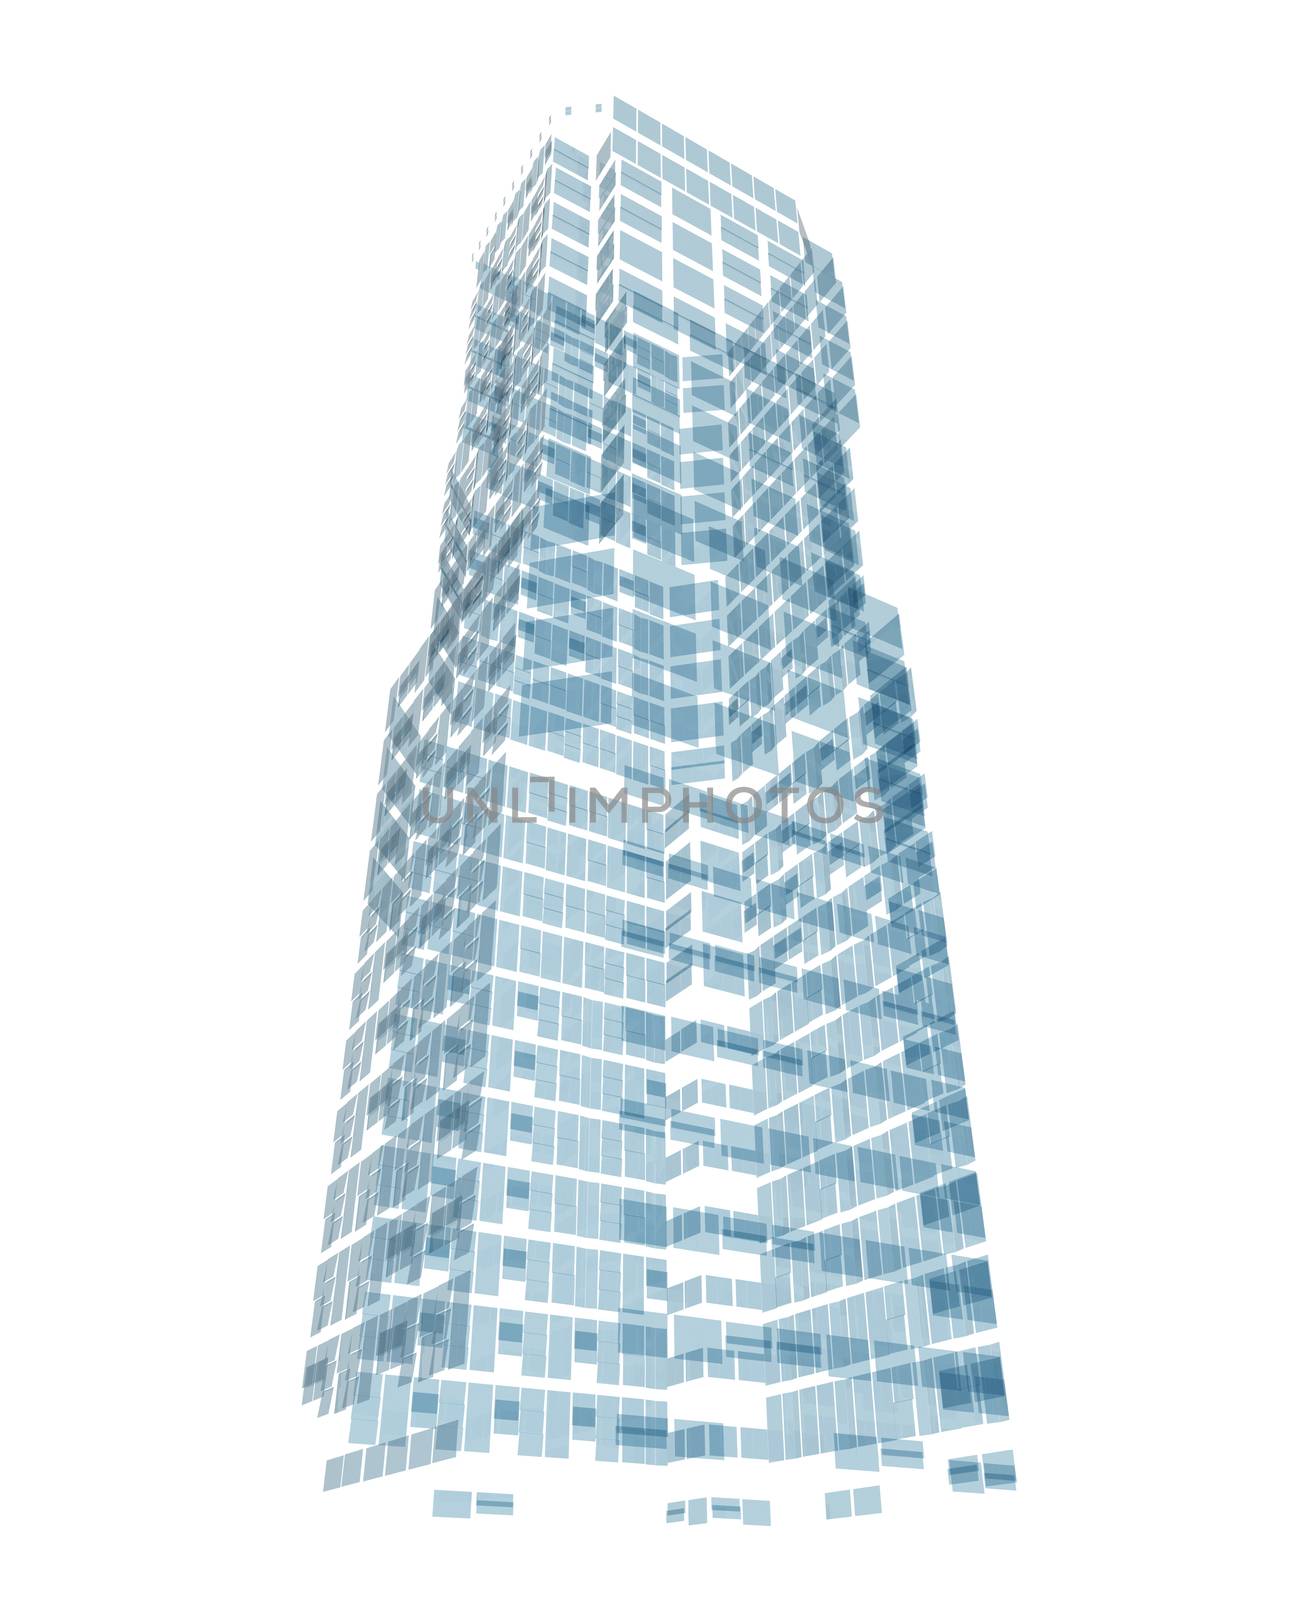 Abstract skyscraper consisting of blue planes. Isolated render on a white background